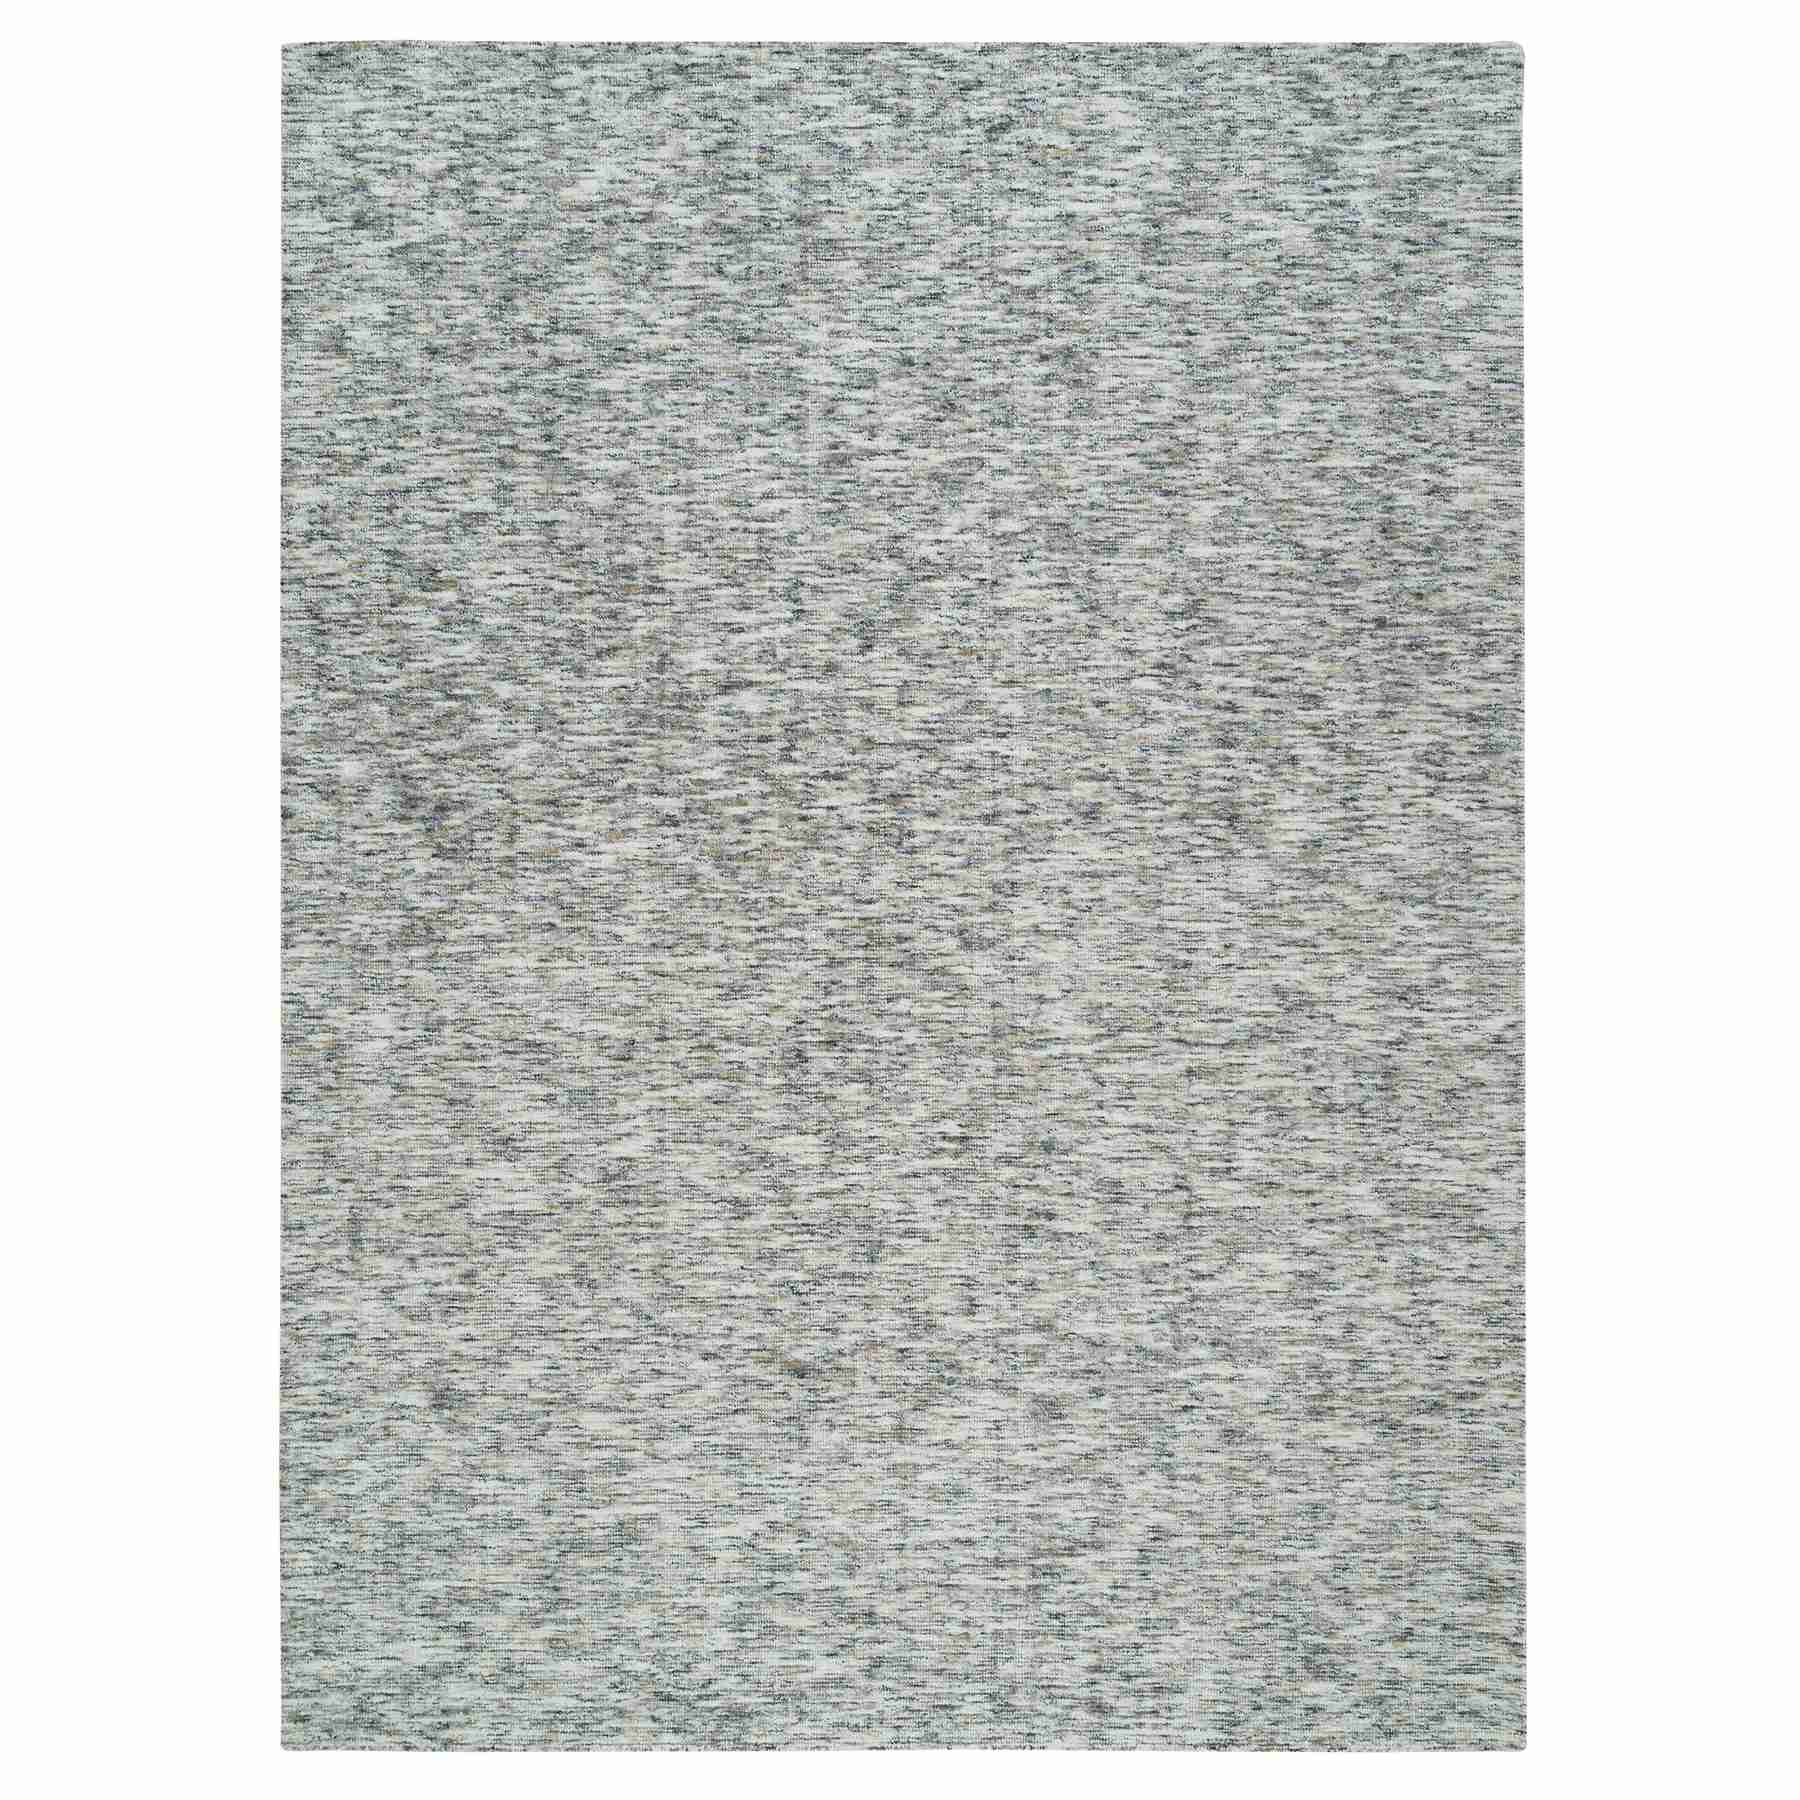 Earth Tone Colors, Modern Striae Design, Soft to the Touch, Pure Wool, Hand Loomed, Oriental Rug